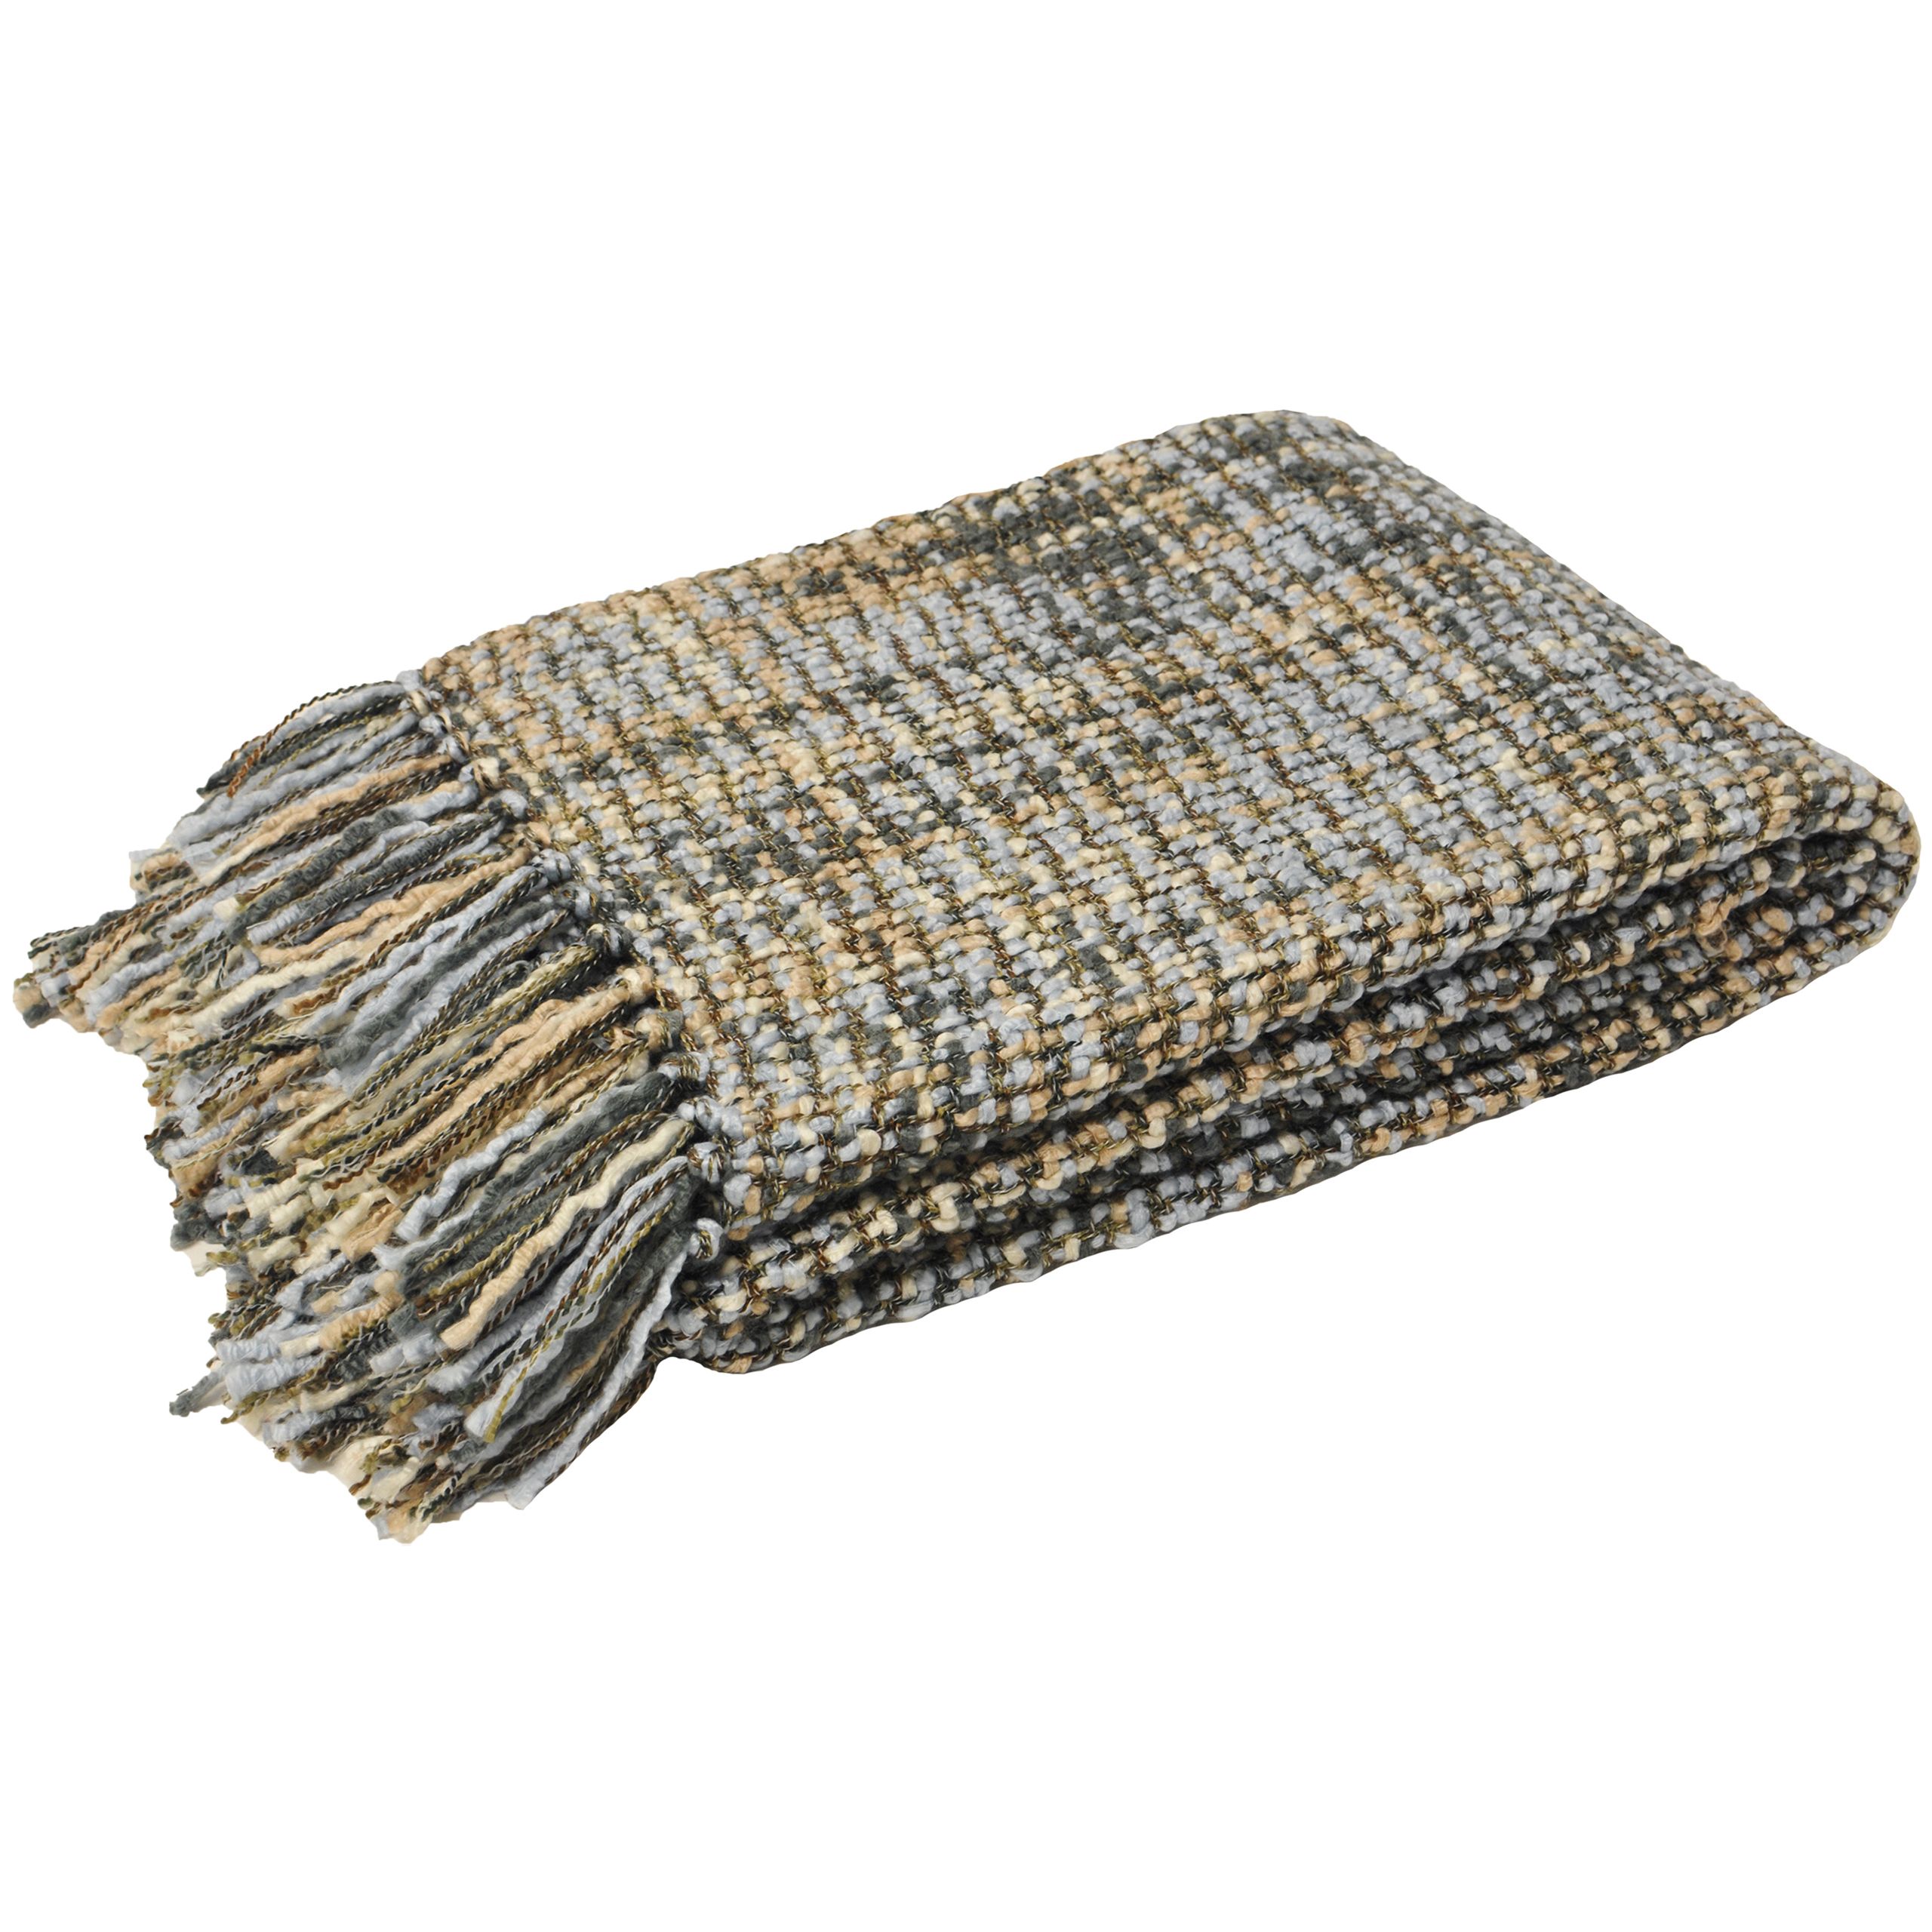 The new baoli woven throw from the paoletti range are the ideal way to bring comfort and style to your home. Featuring a contemporary weave design, this throw has been manufactured to the highest quality and is made from an acrylic, polyester mix. This distinctive and contemporary fringed design will surely add a touch of glamour to your living space and are to snuggle up under on a cold night or to use during summer as a picnic blanket.